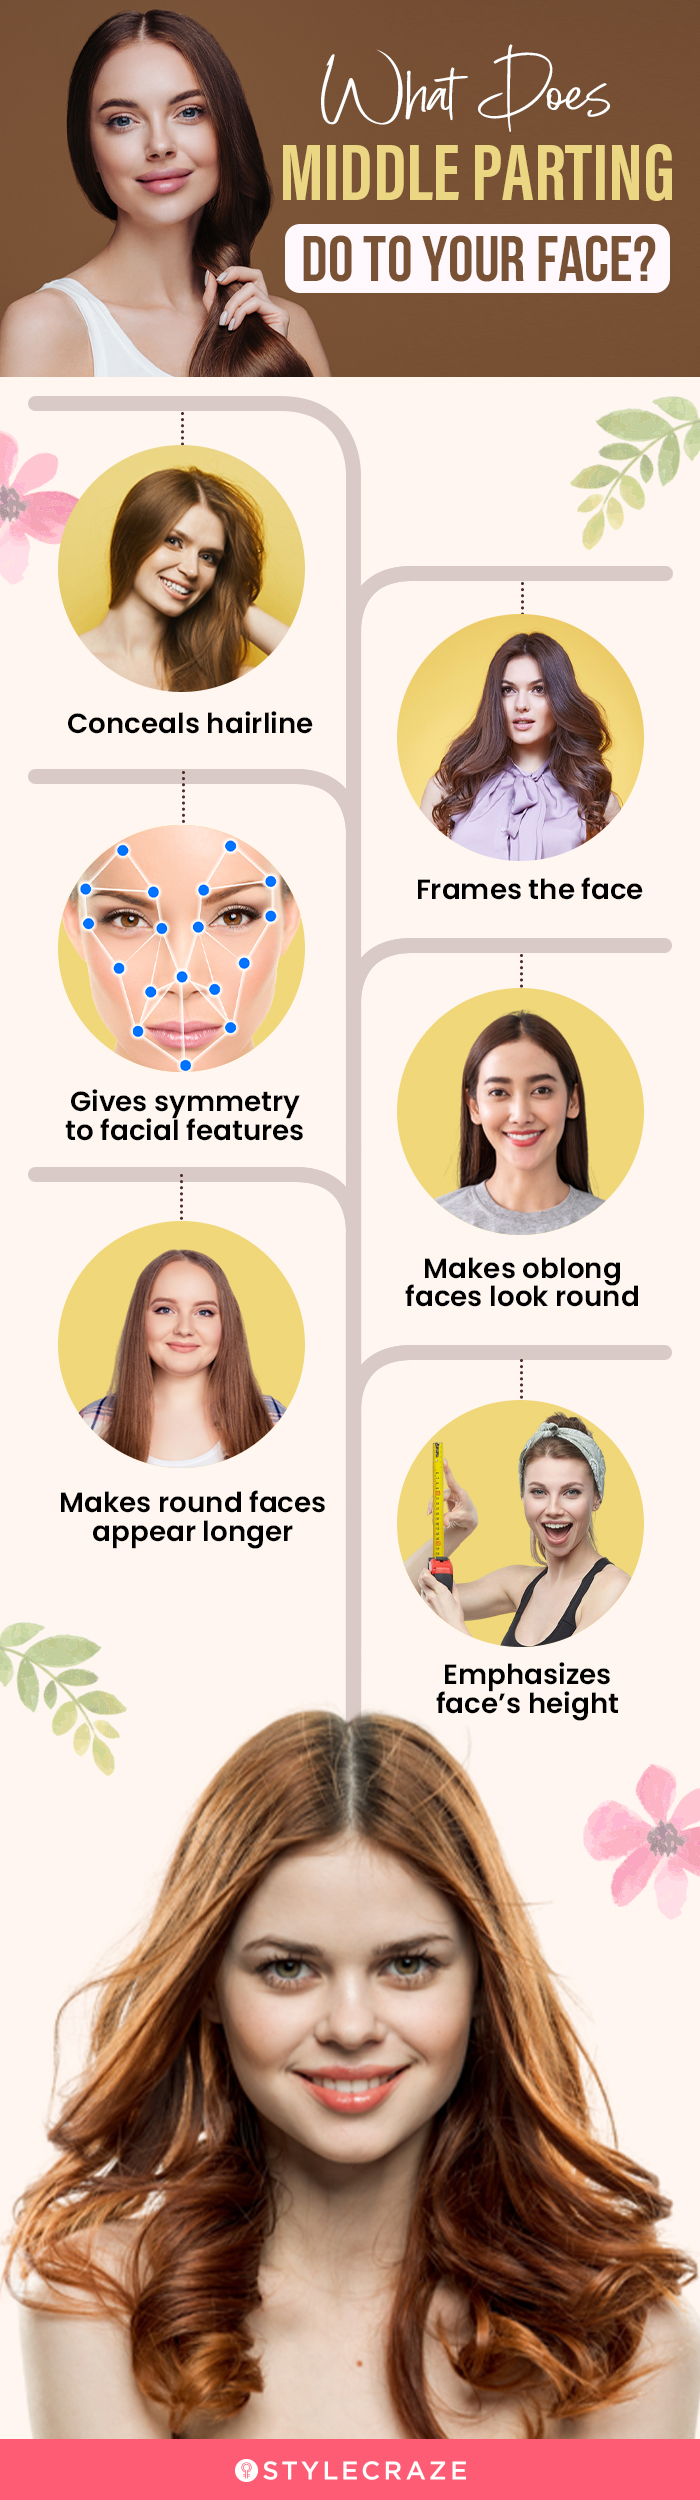 what does middle parting do to your face [infographic]